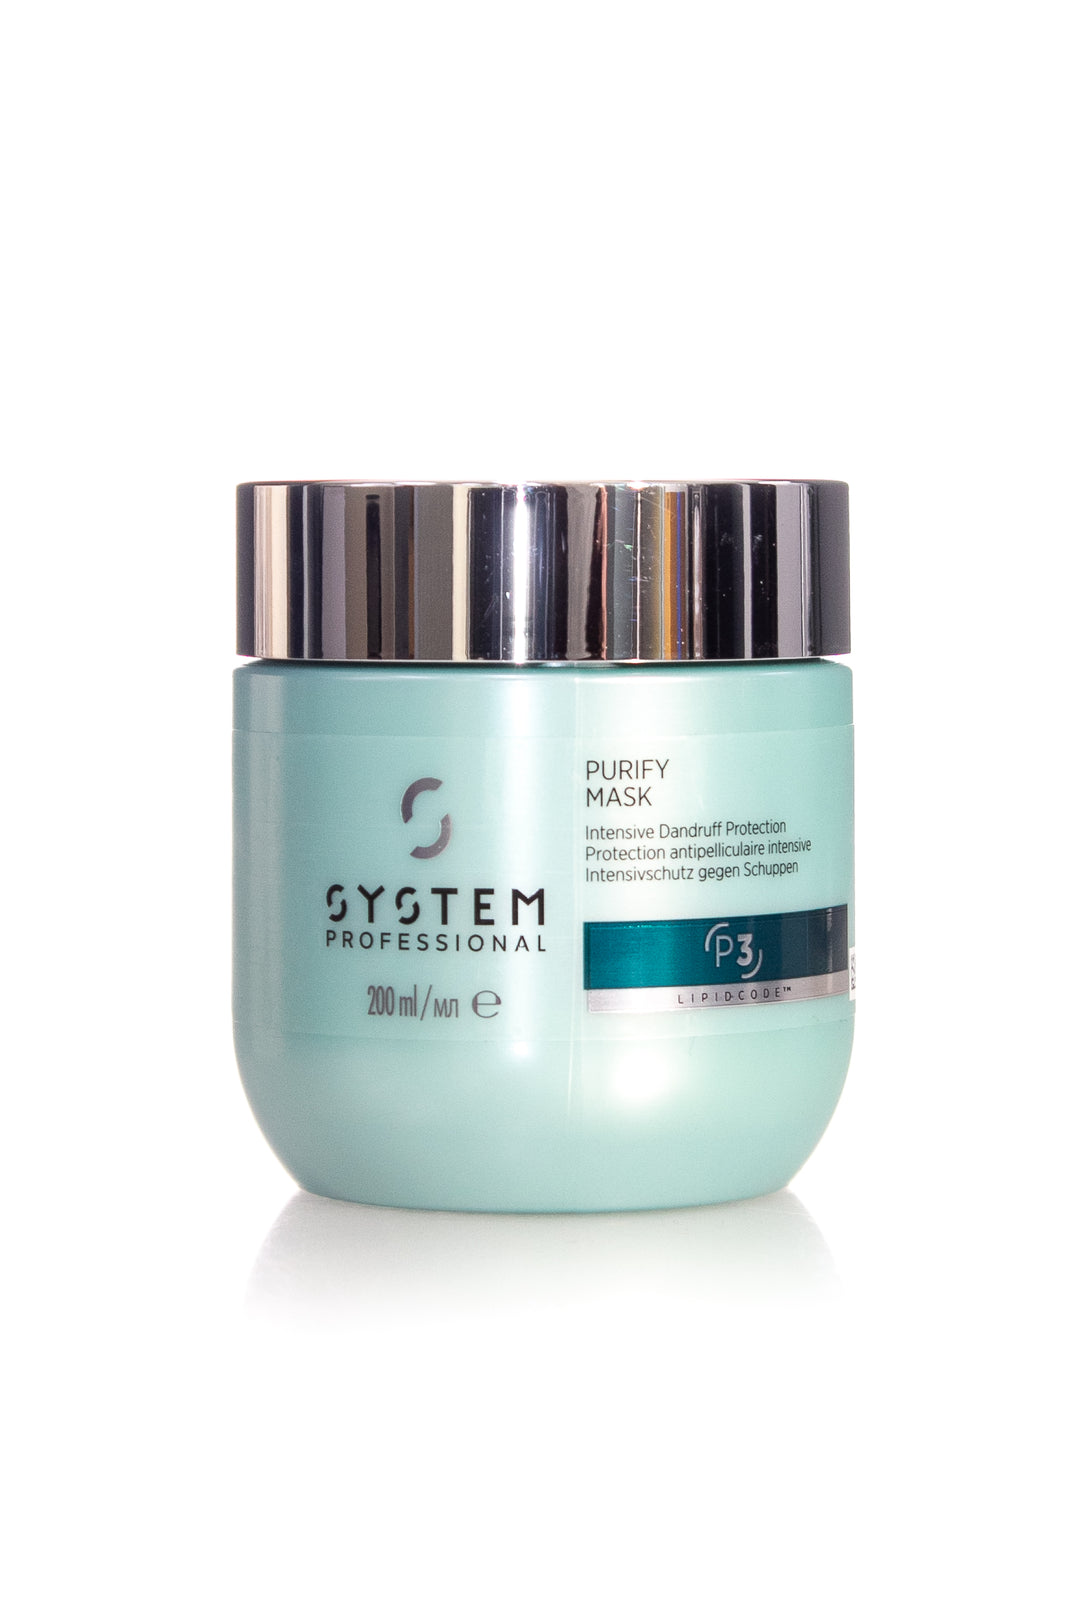 SYSTEM PROFESSIONAL Purify Mask  | 200ml